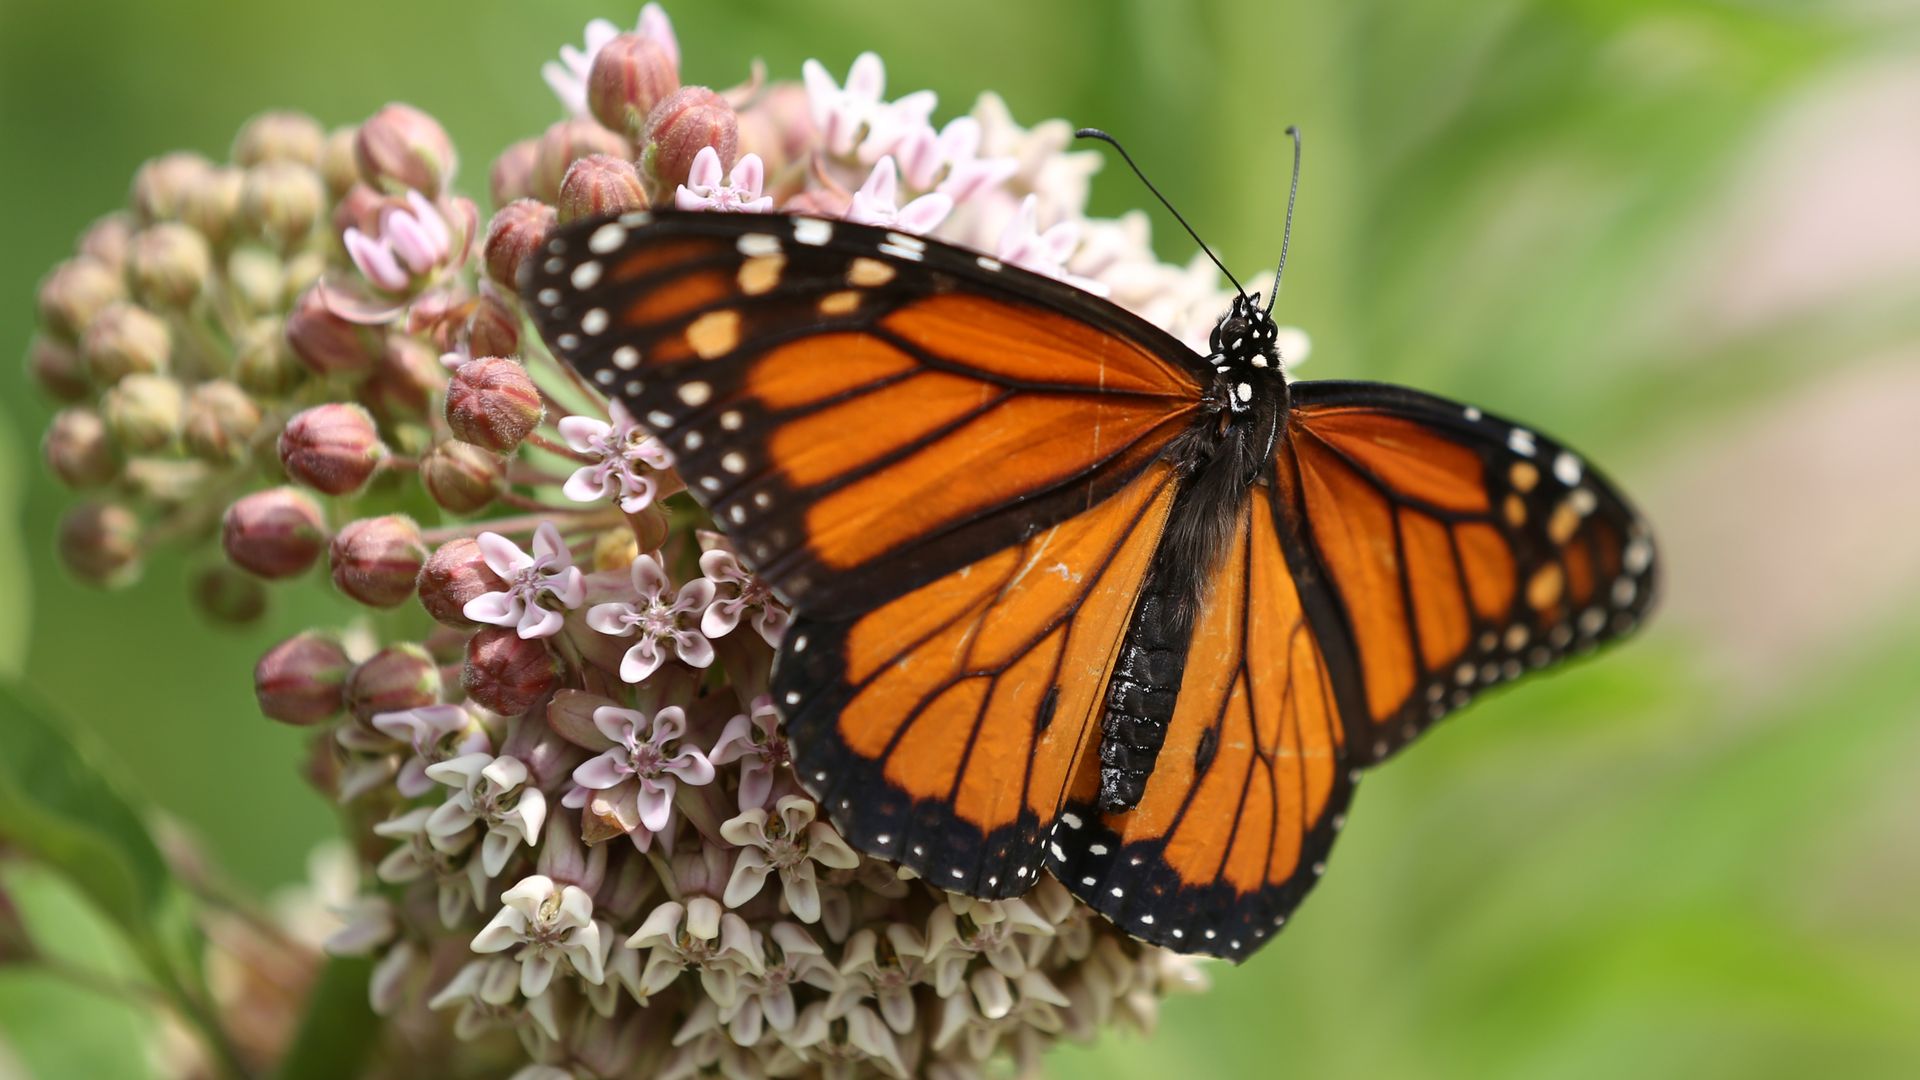 TDOT launches effort to save monarch butterflies, offers free milkweed ...